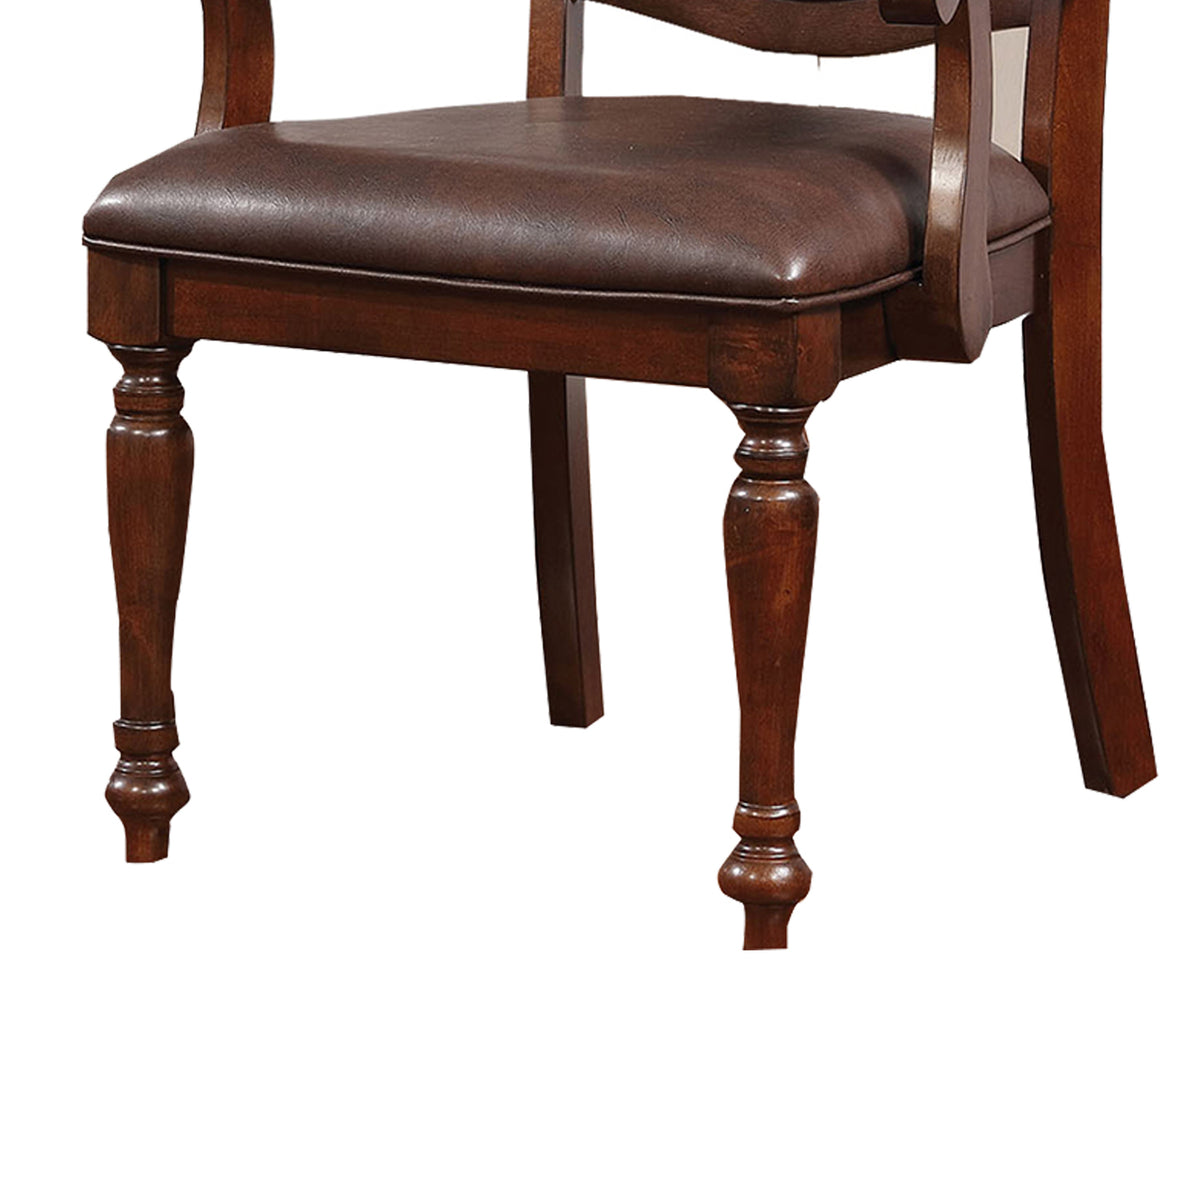 Wooden Arm Chair With Leather Upholstery, Cherry Brown, Set Of 2